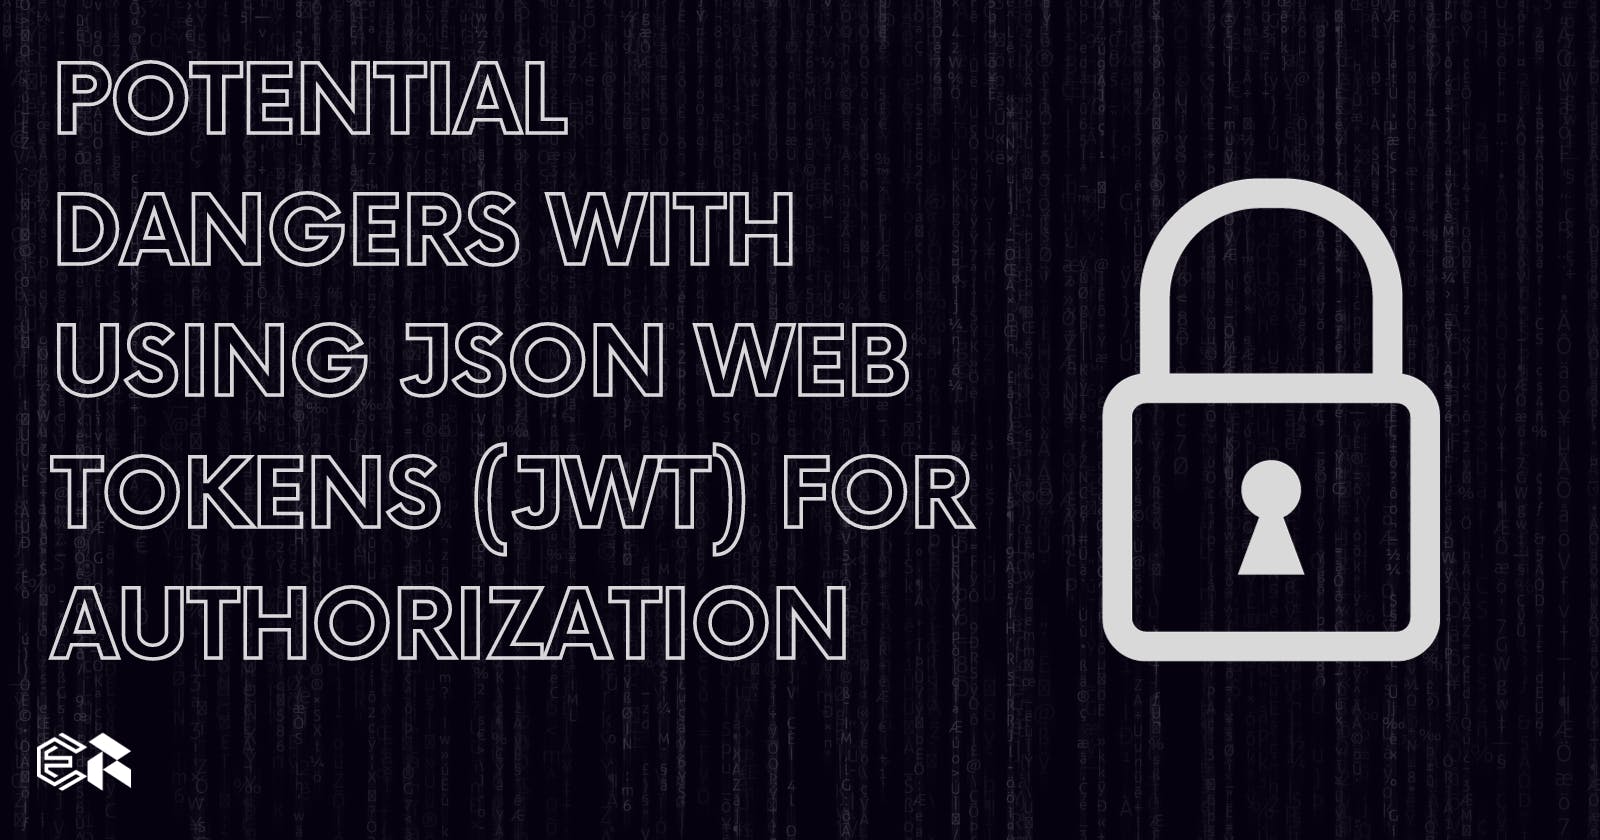 Potential Dangers with Using JSON Web Tokens (JWT) For Authorization